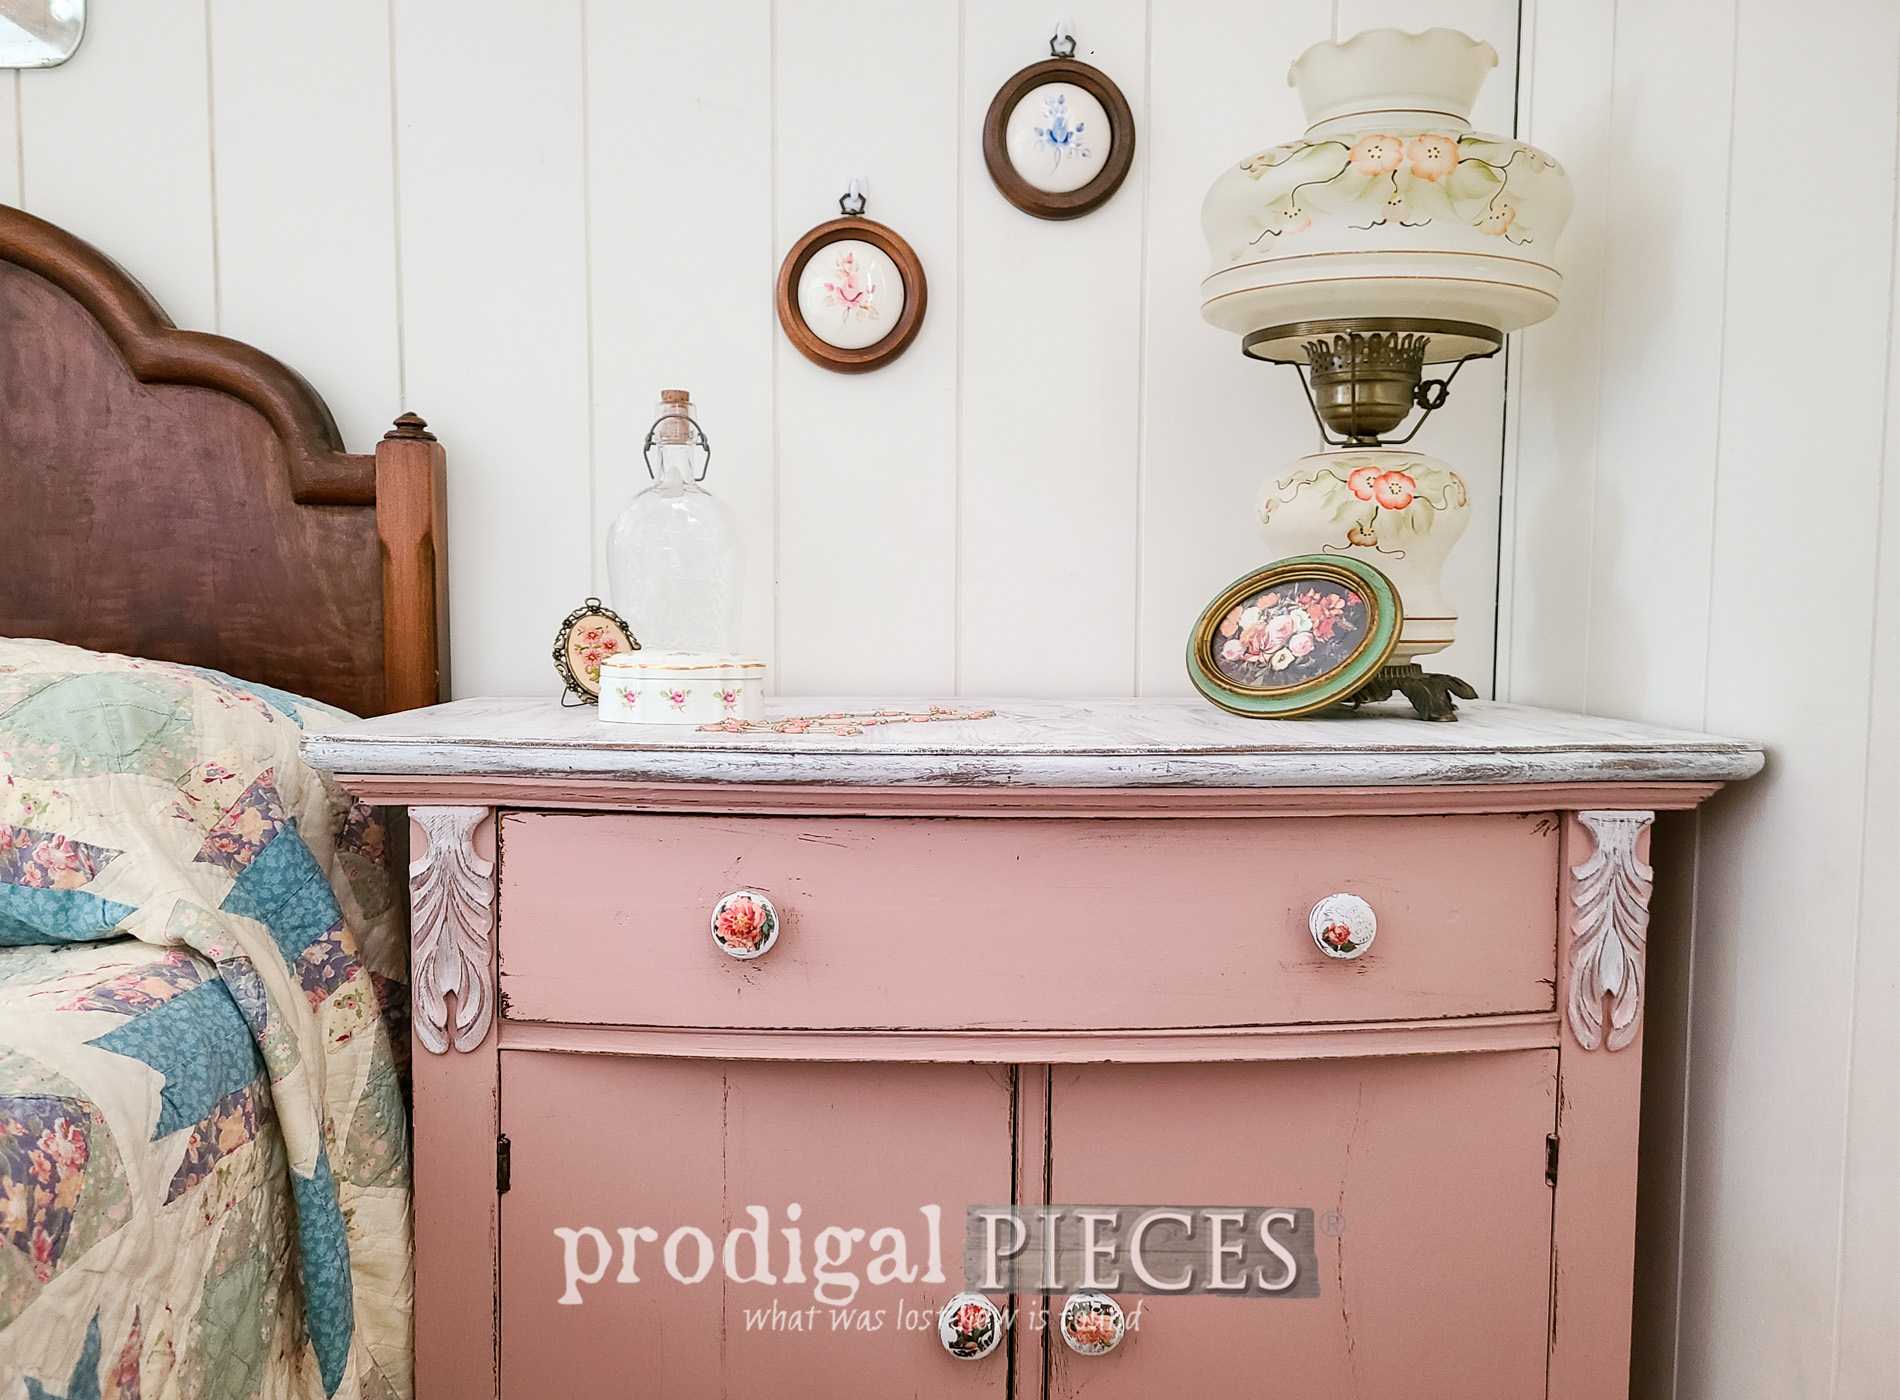 Featured Antique Wash Stand in Pink by Larissa of Prodigal Pieces | prodigalpieces.com #prodigalpieces #furniture #diy #cottage #farmhouse